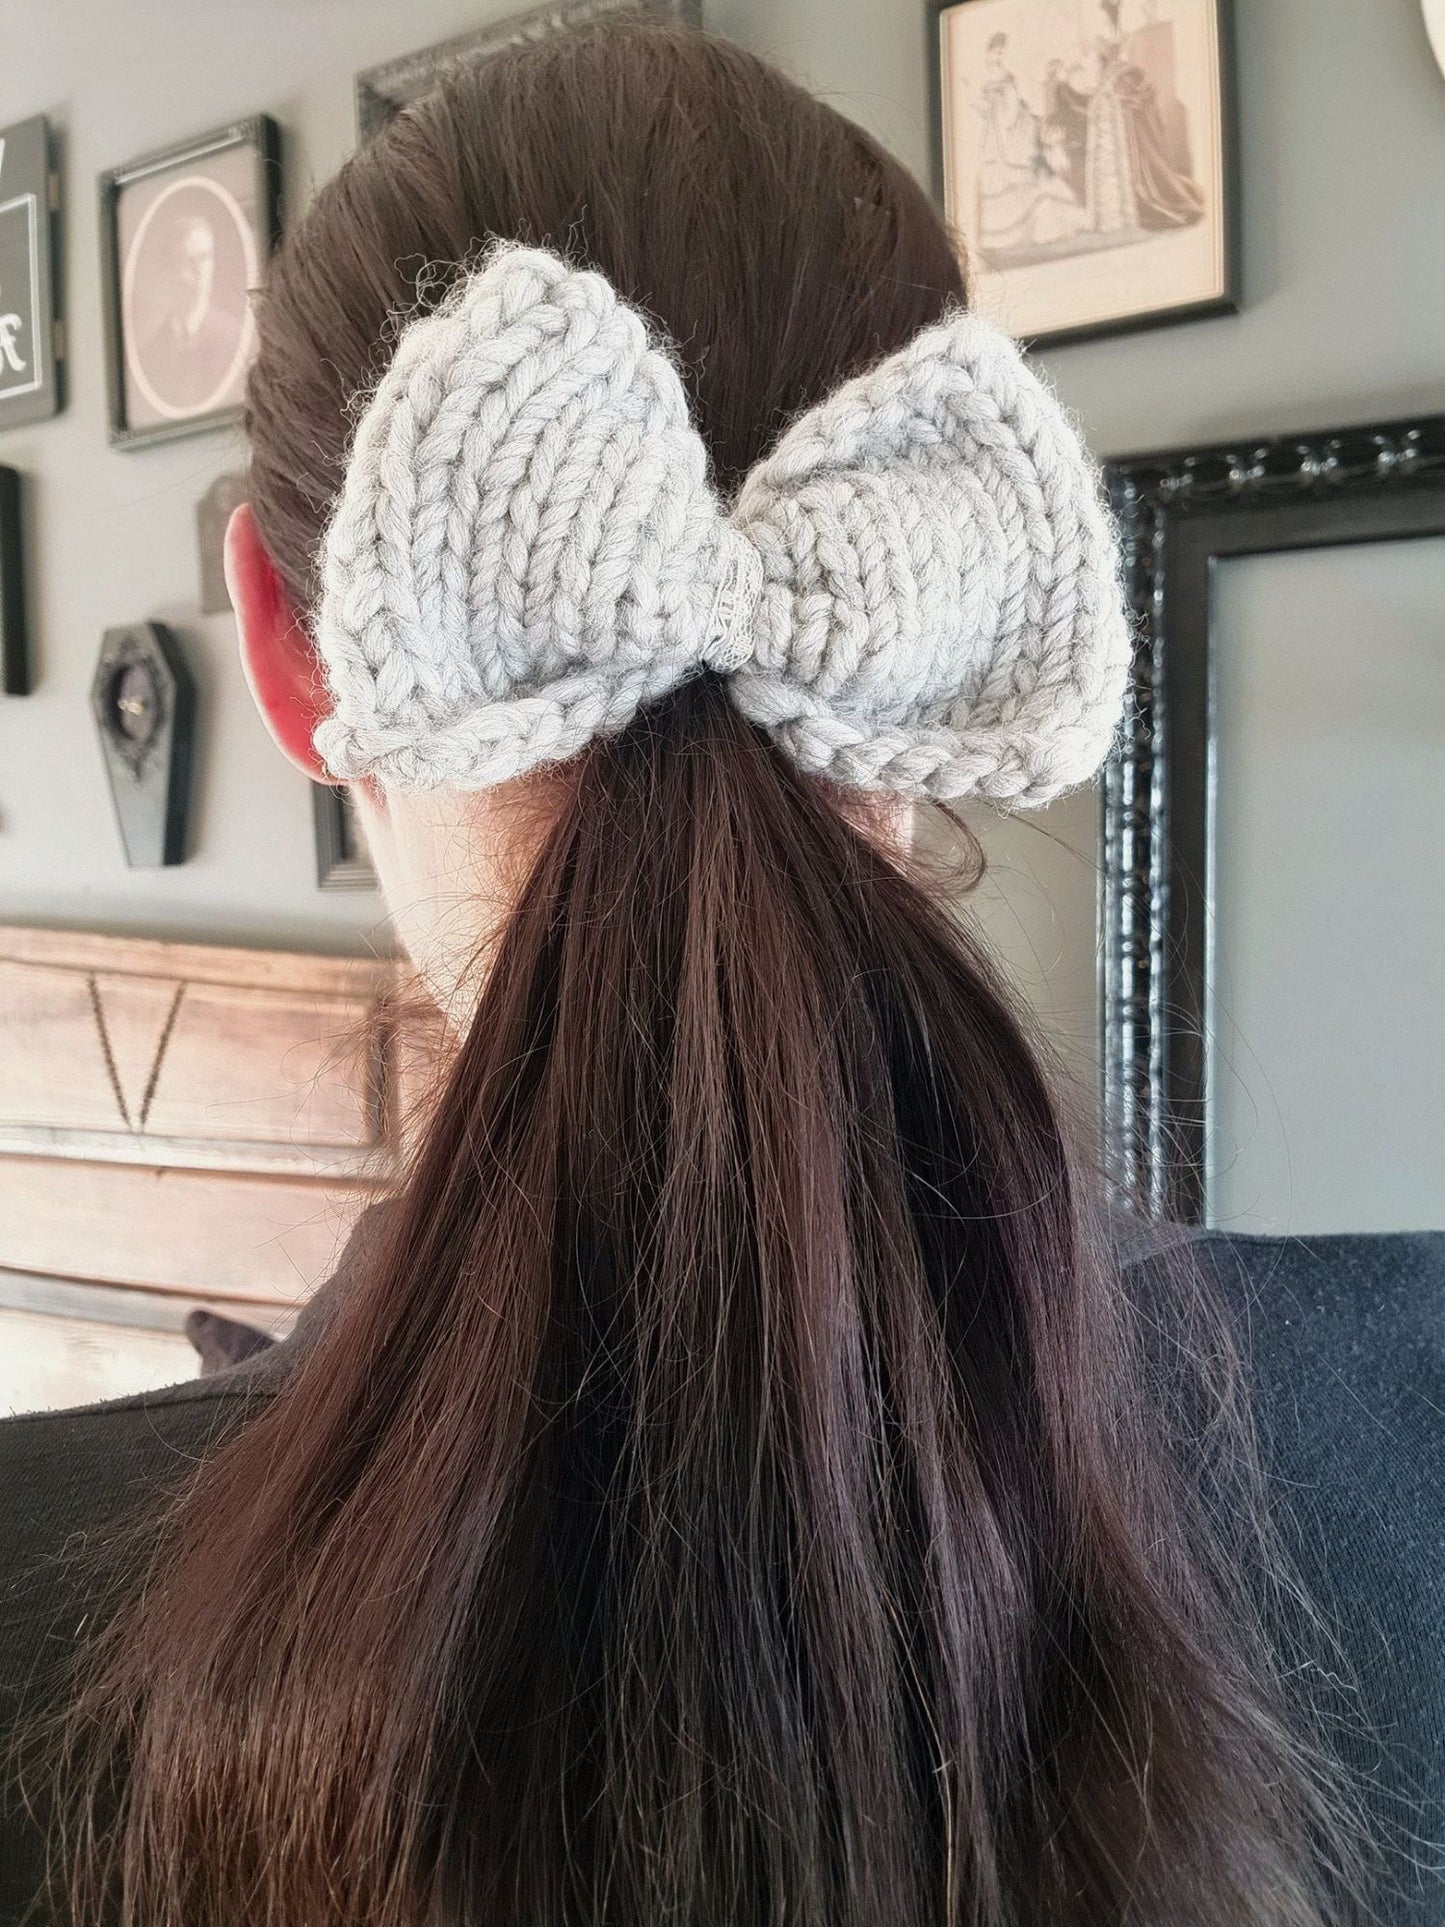 The "Ice Queen" Hand Knit Hair Bow